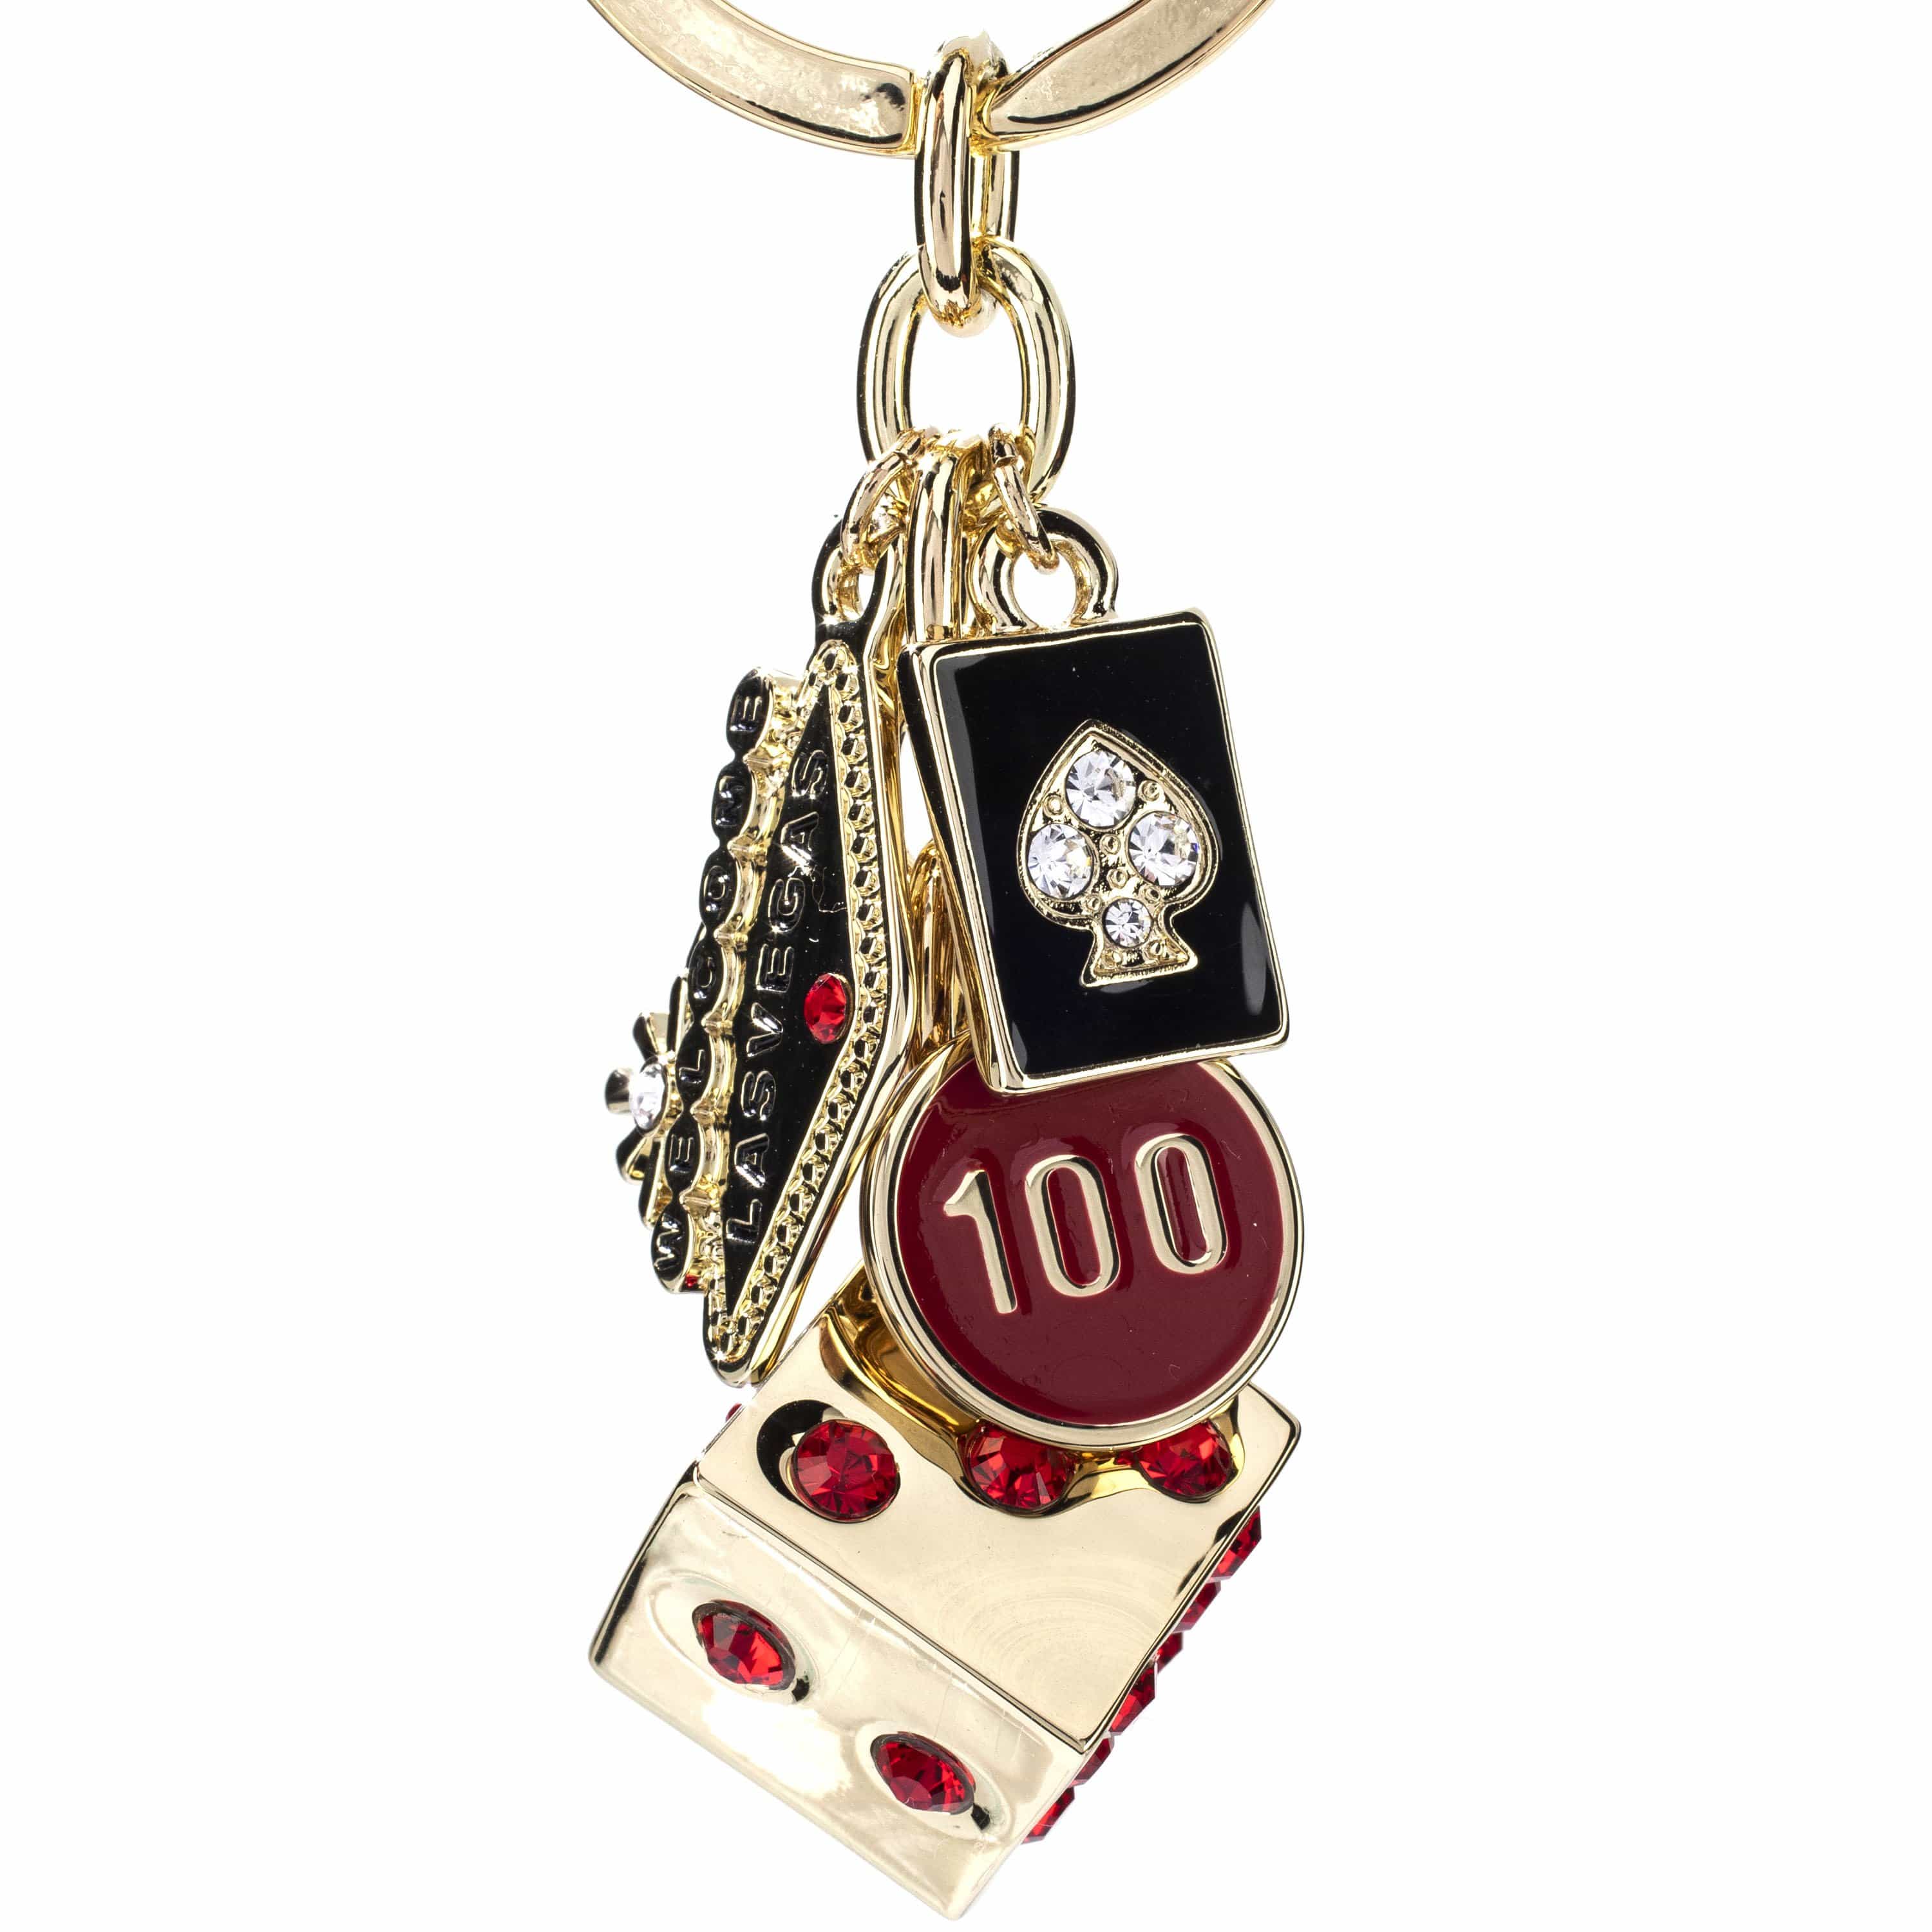 Kalifano Crystal Keychains Las Vegas Welcome Sign Gold Dice Keychain made with Swarovski Crystals SKC-184